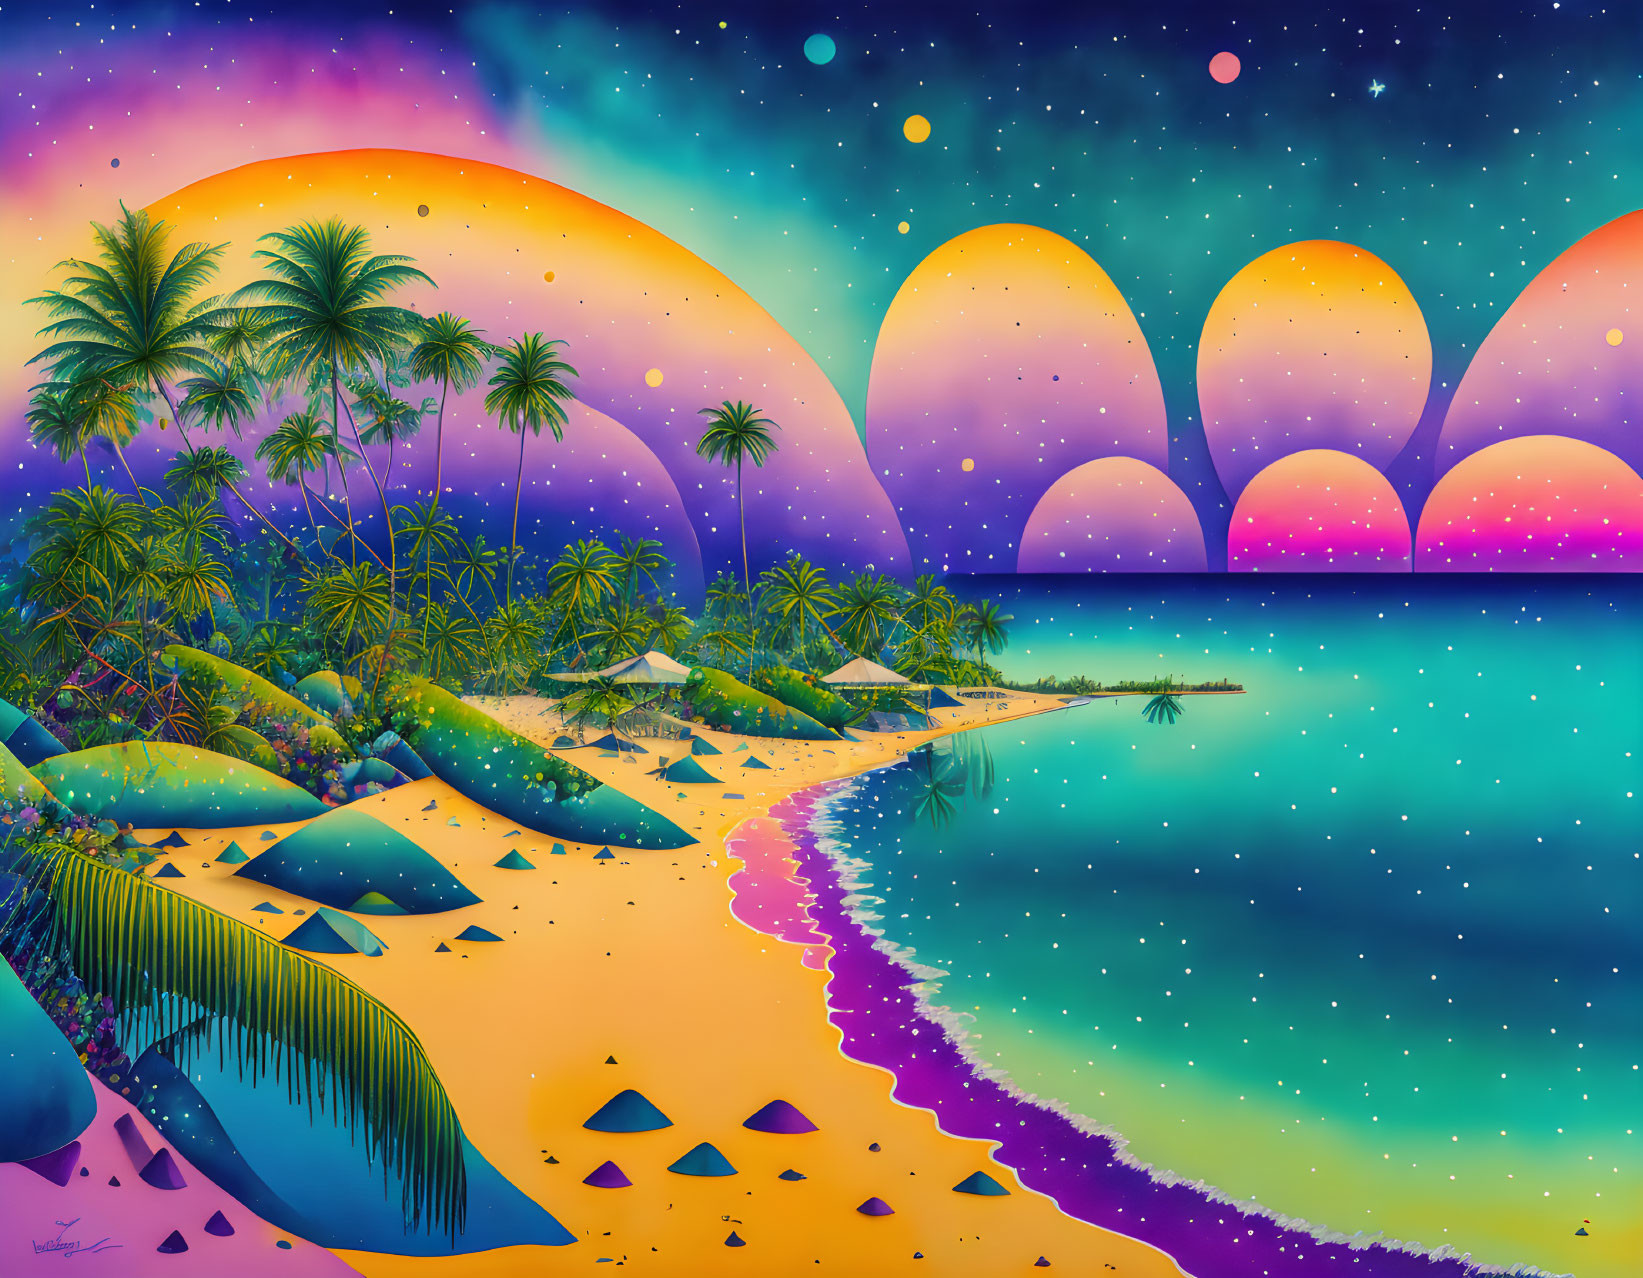 Surreal painting of tropical beach with palms.